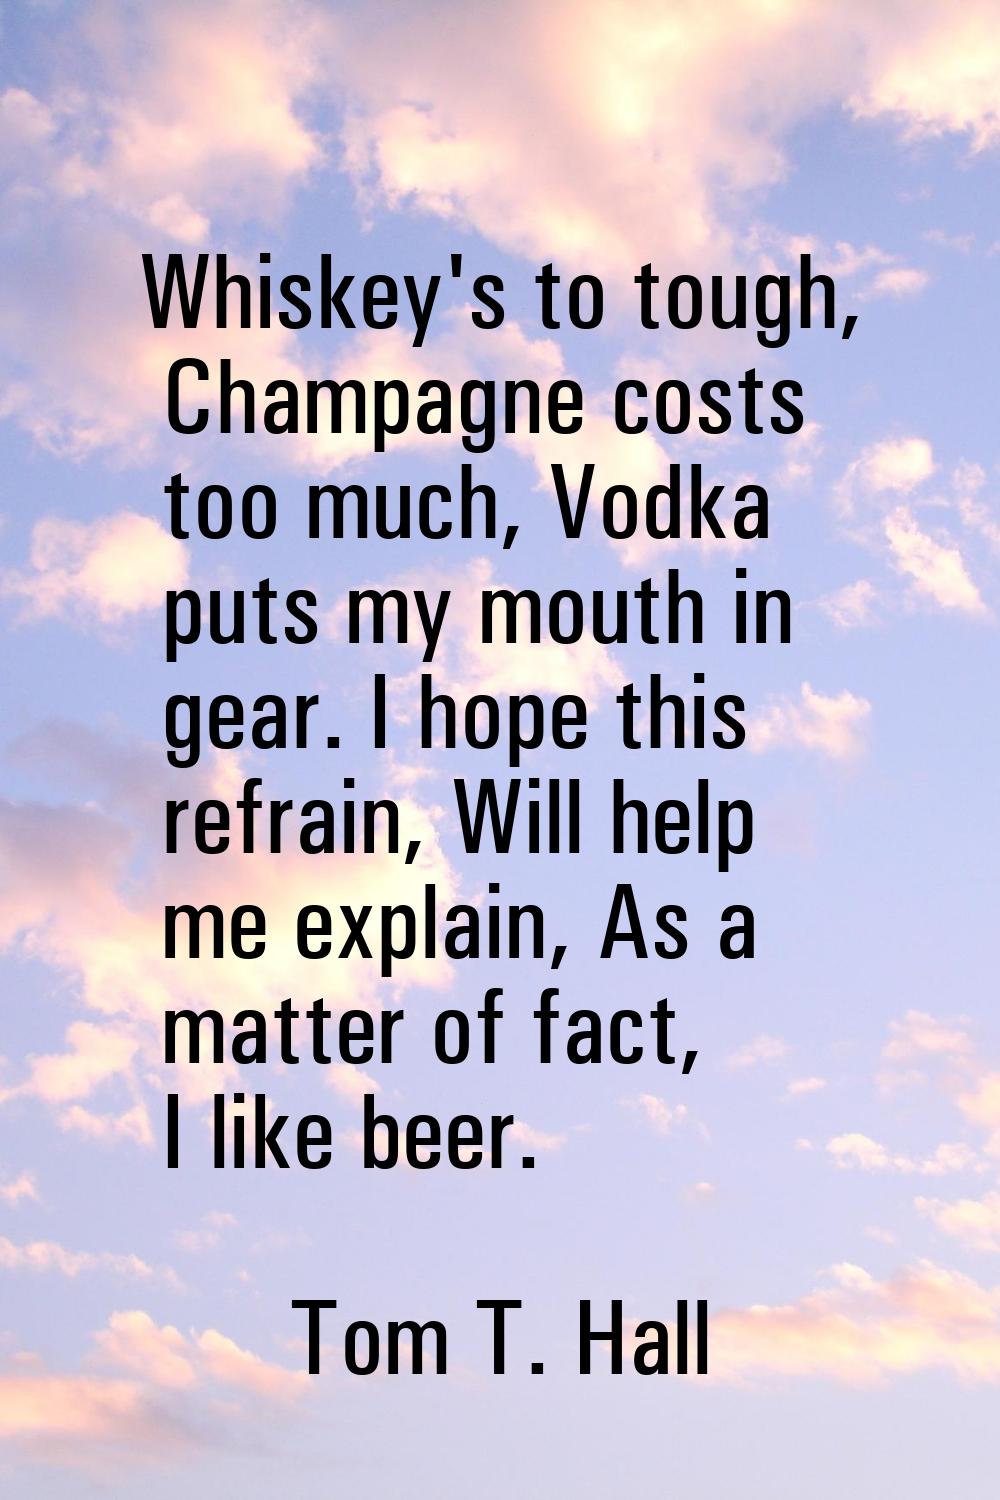 Whiskey's to tough, Champagne costs too much, Vodka puts my mouth in gear. I hope this refrain, Wil